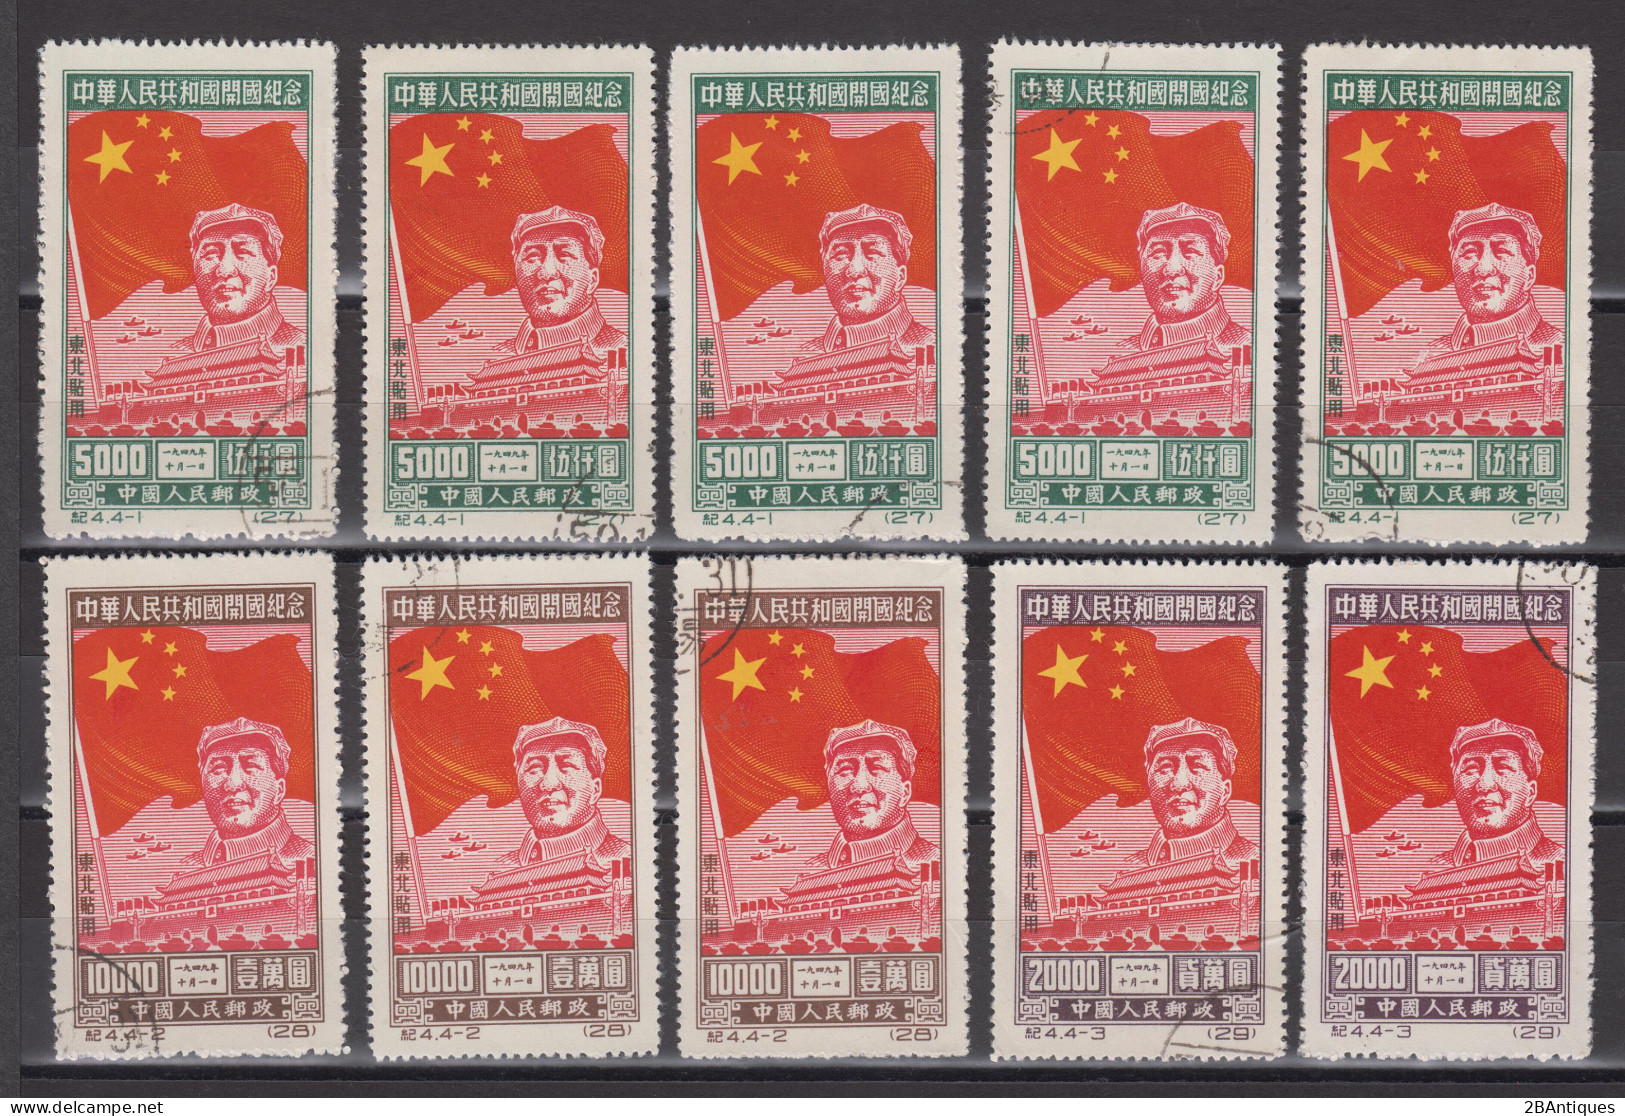 NORTHEAST CHINA 1950 - Mao CTO 10 Stamps - Chine Du Nord-Est 1946-48